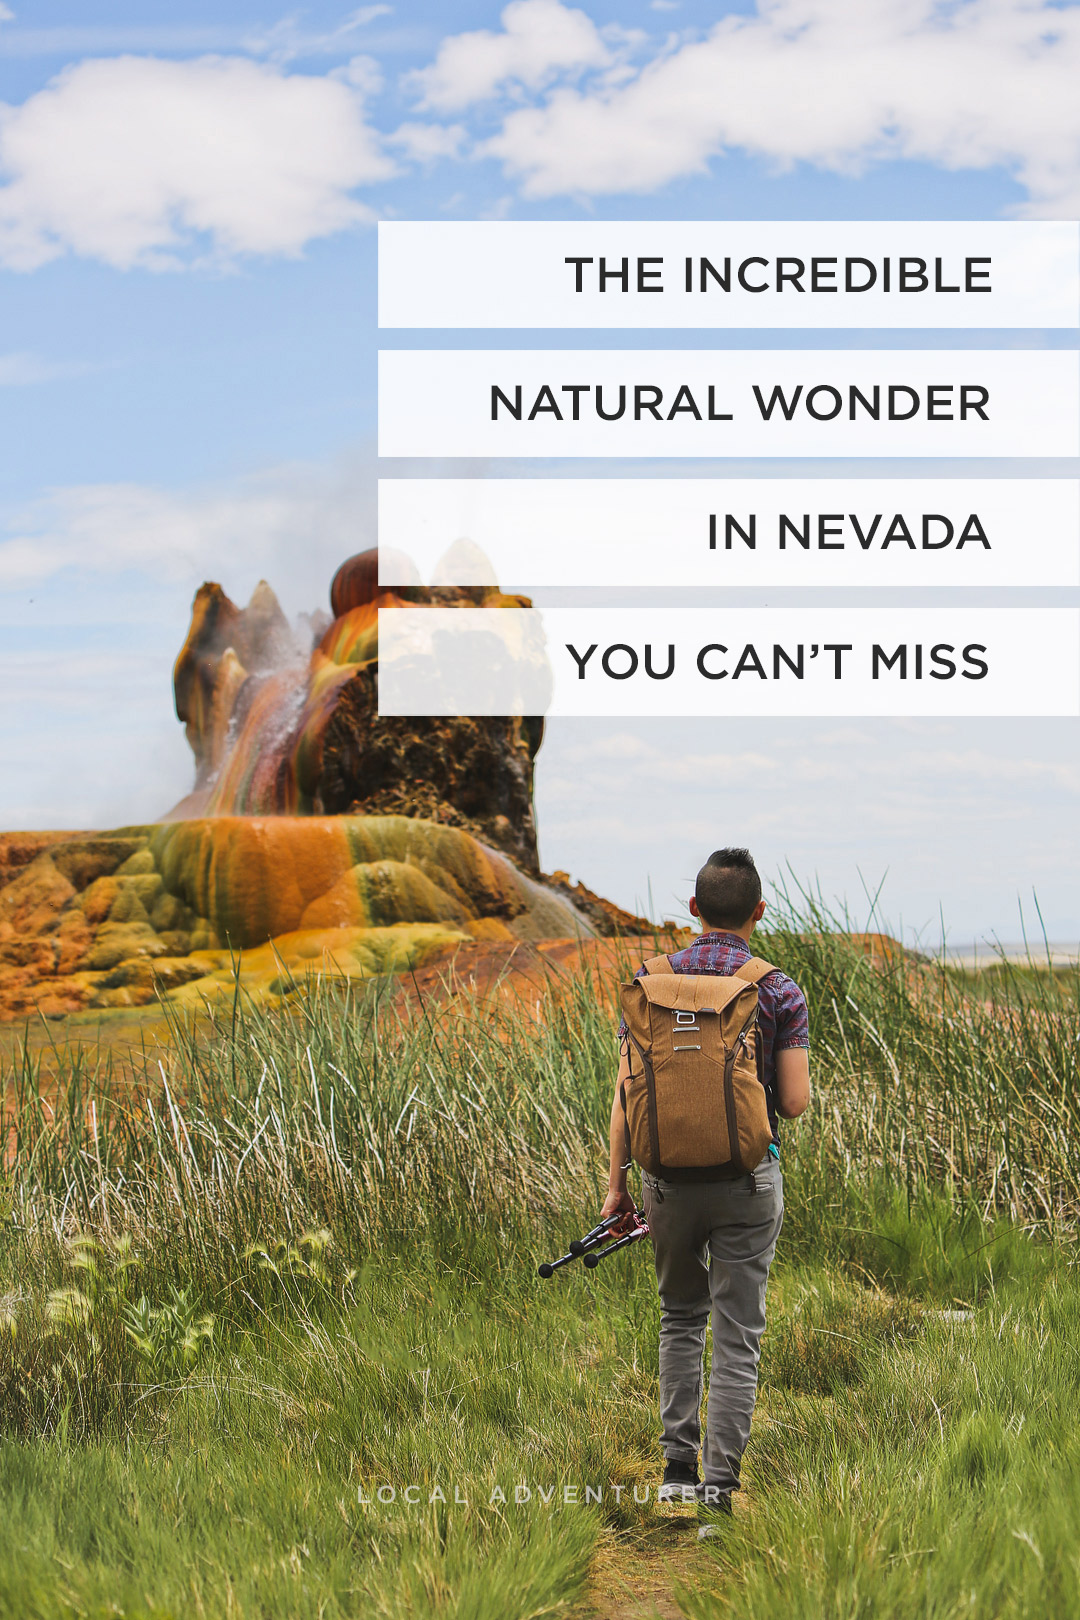 Ever heard of the natural wonder Fly Geyser in Nevada? Save this pin and check out our guide on everything you need to know. Find out more about how to book tours, learn about the hot springs, get photo tips on how to shoot this nevada geyser, and when to visit and what to bring. Go see this natural phenomenon now that it’s finally open to the public // Local Adventurer #localadventurer #travelnevada #dfmi #nevada #flygeyser #blackrockdesert #desert